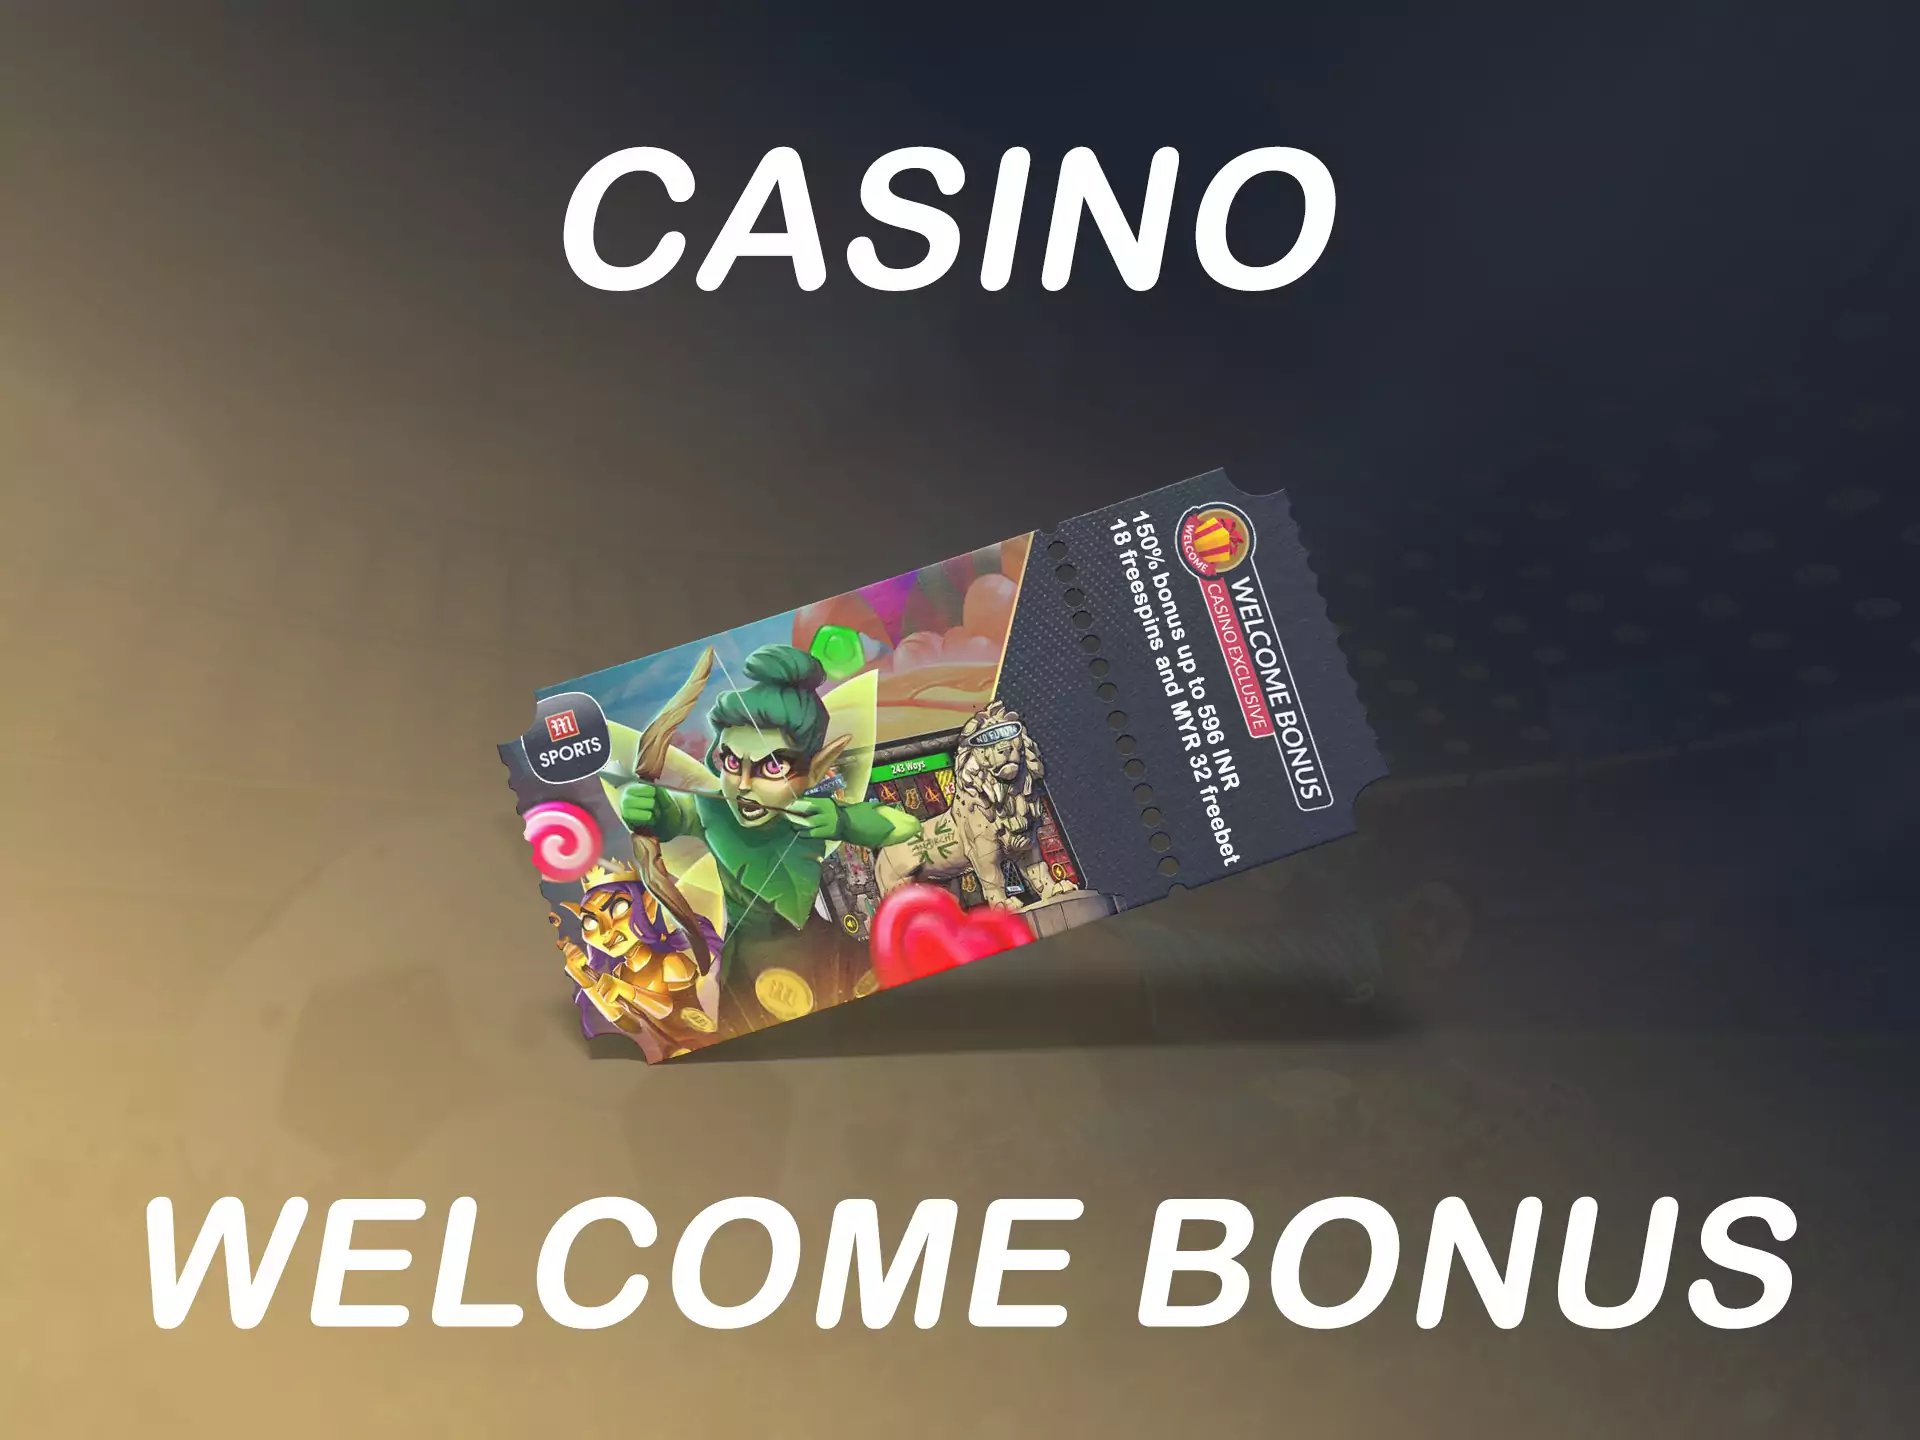 Between matches, you can spend your casino bonus playing games.